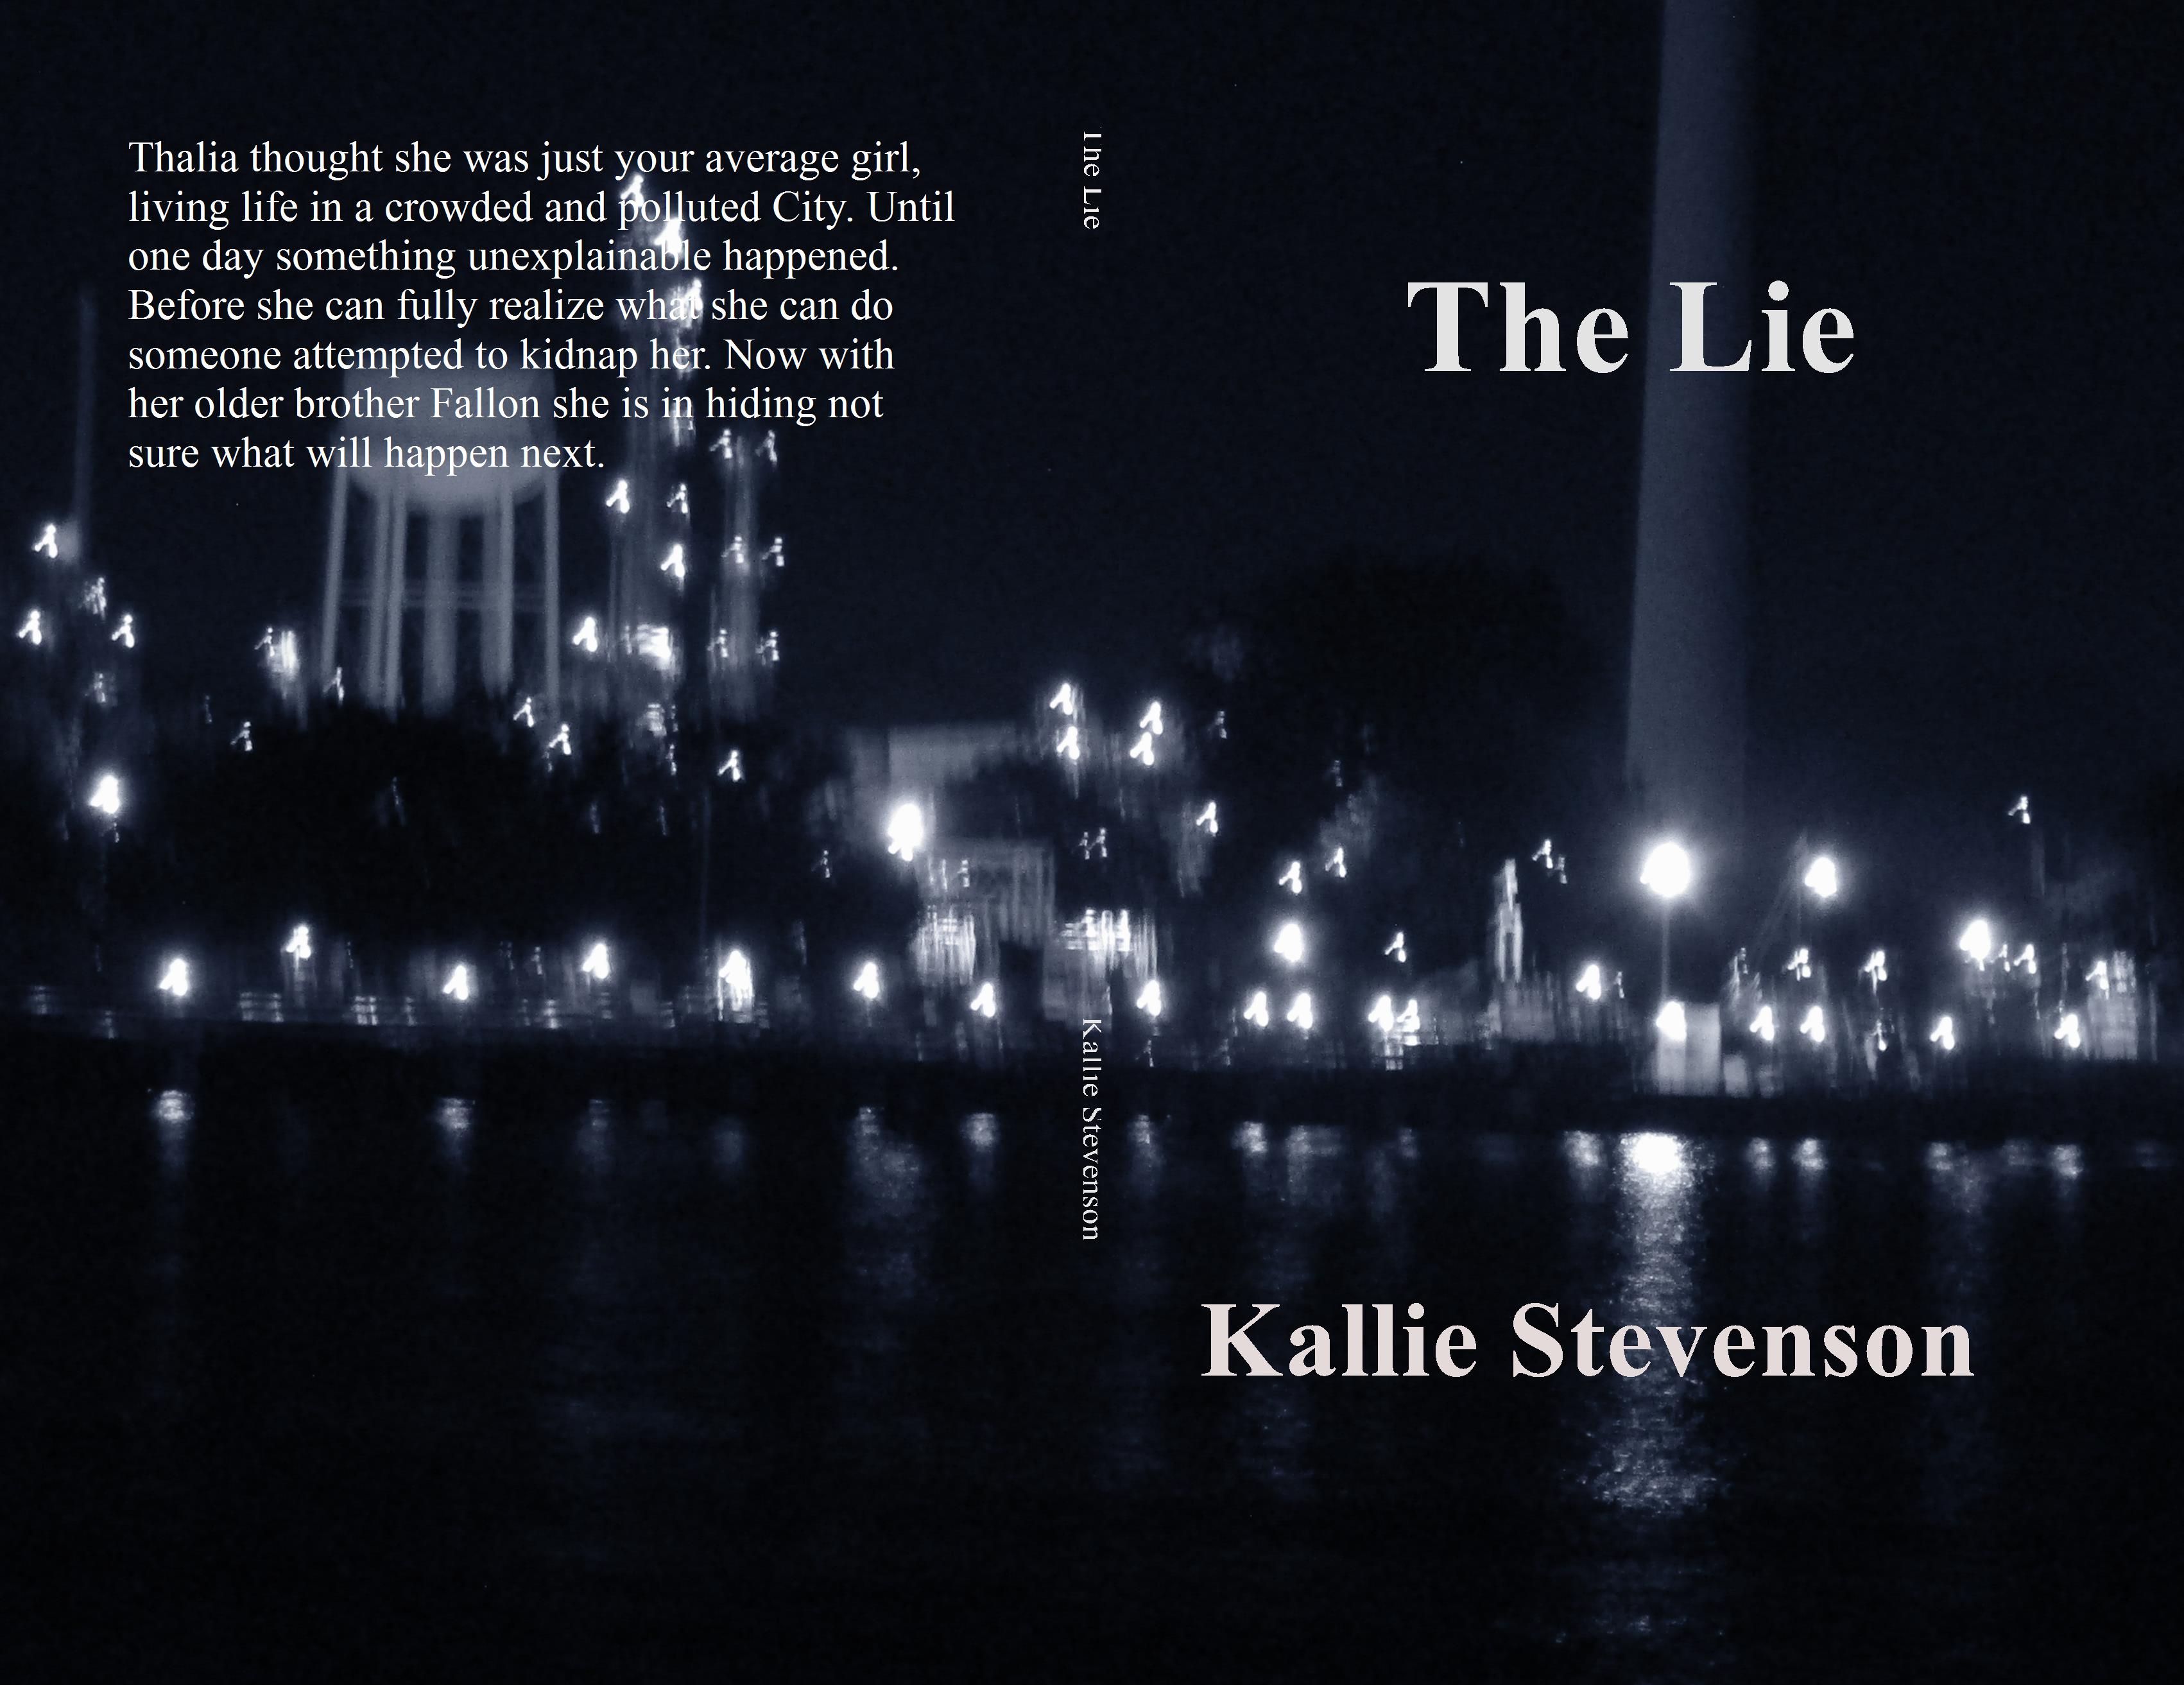 The Lie cover image